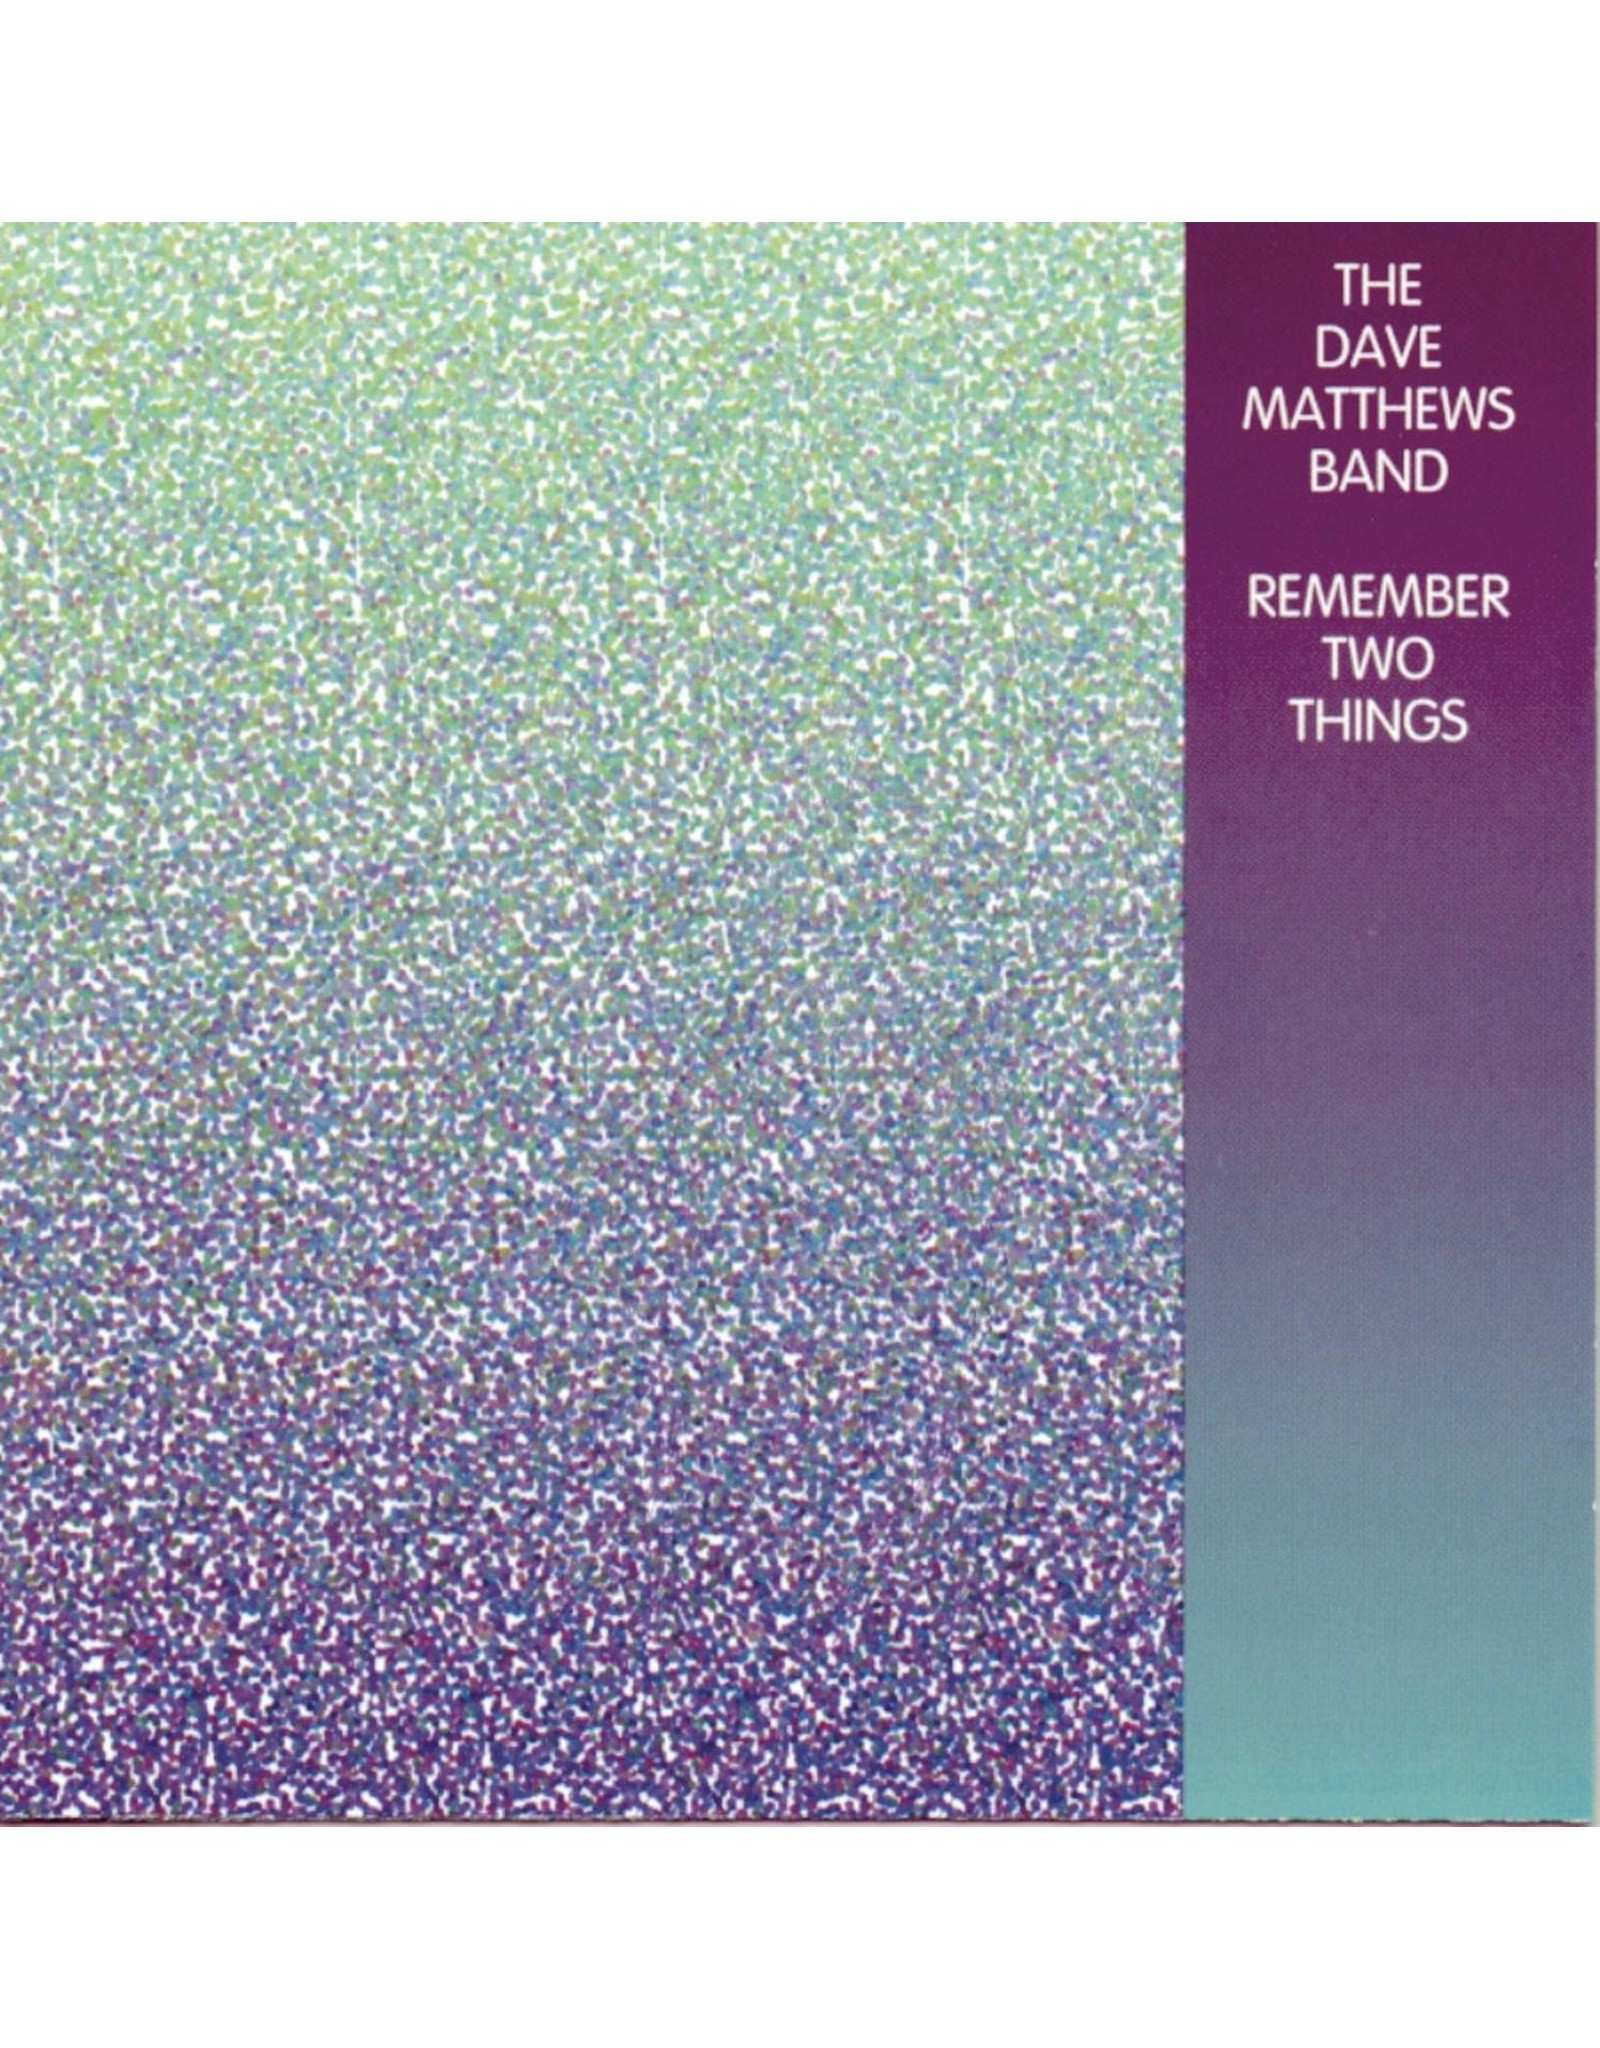 Dave Matthews Band - Remember Two Things (30th Anniversary)